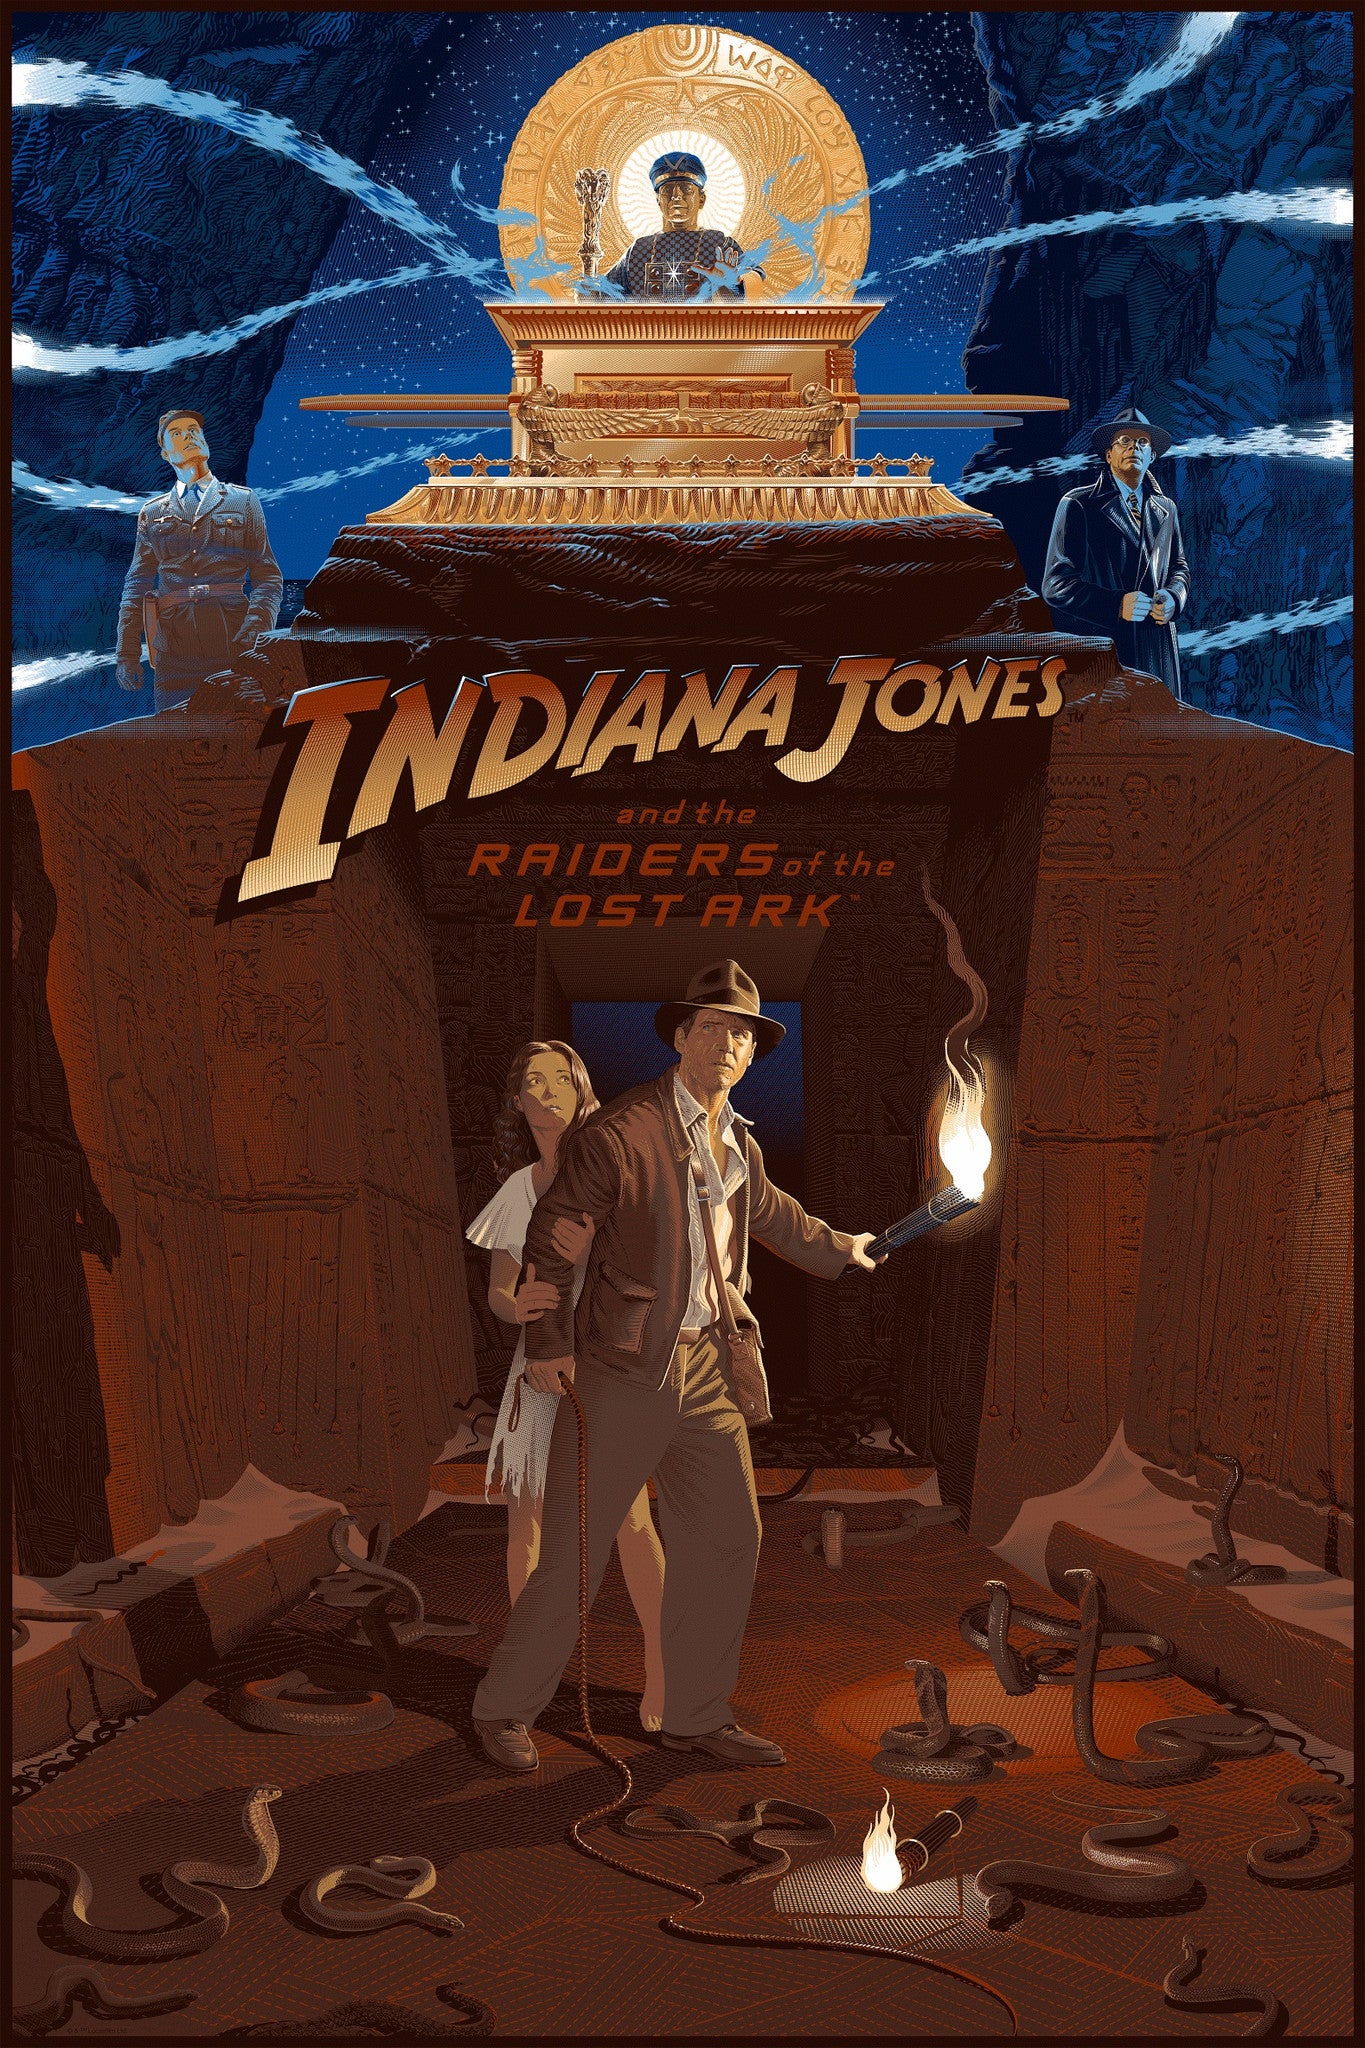 Laurent Durieux "Indiana Jones and The Raiders of The Lost Ark" Wood Variant